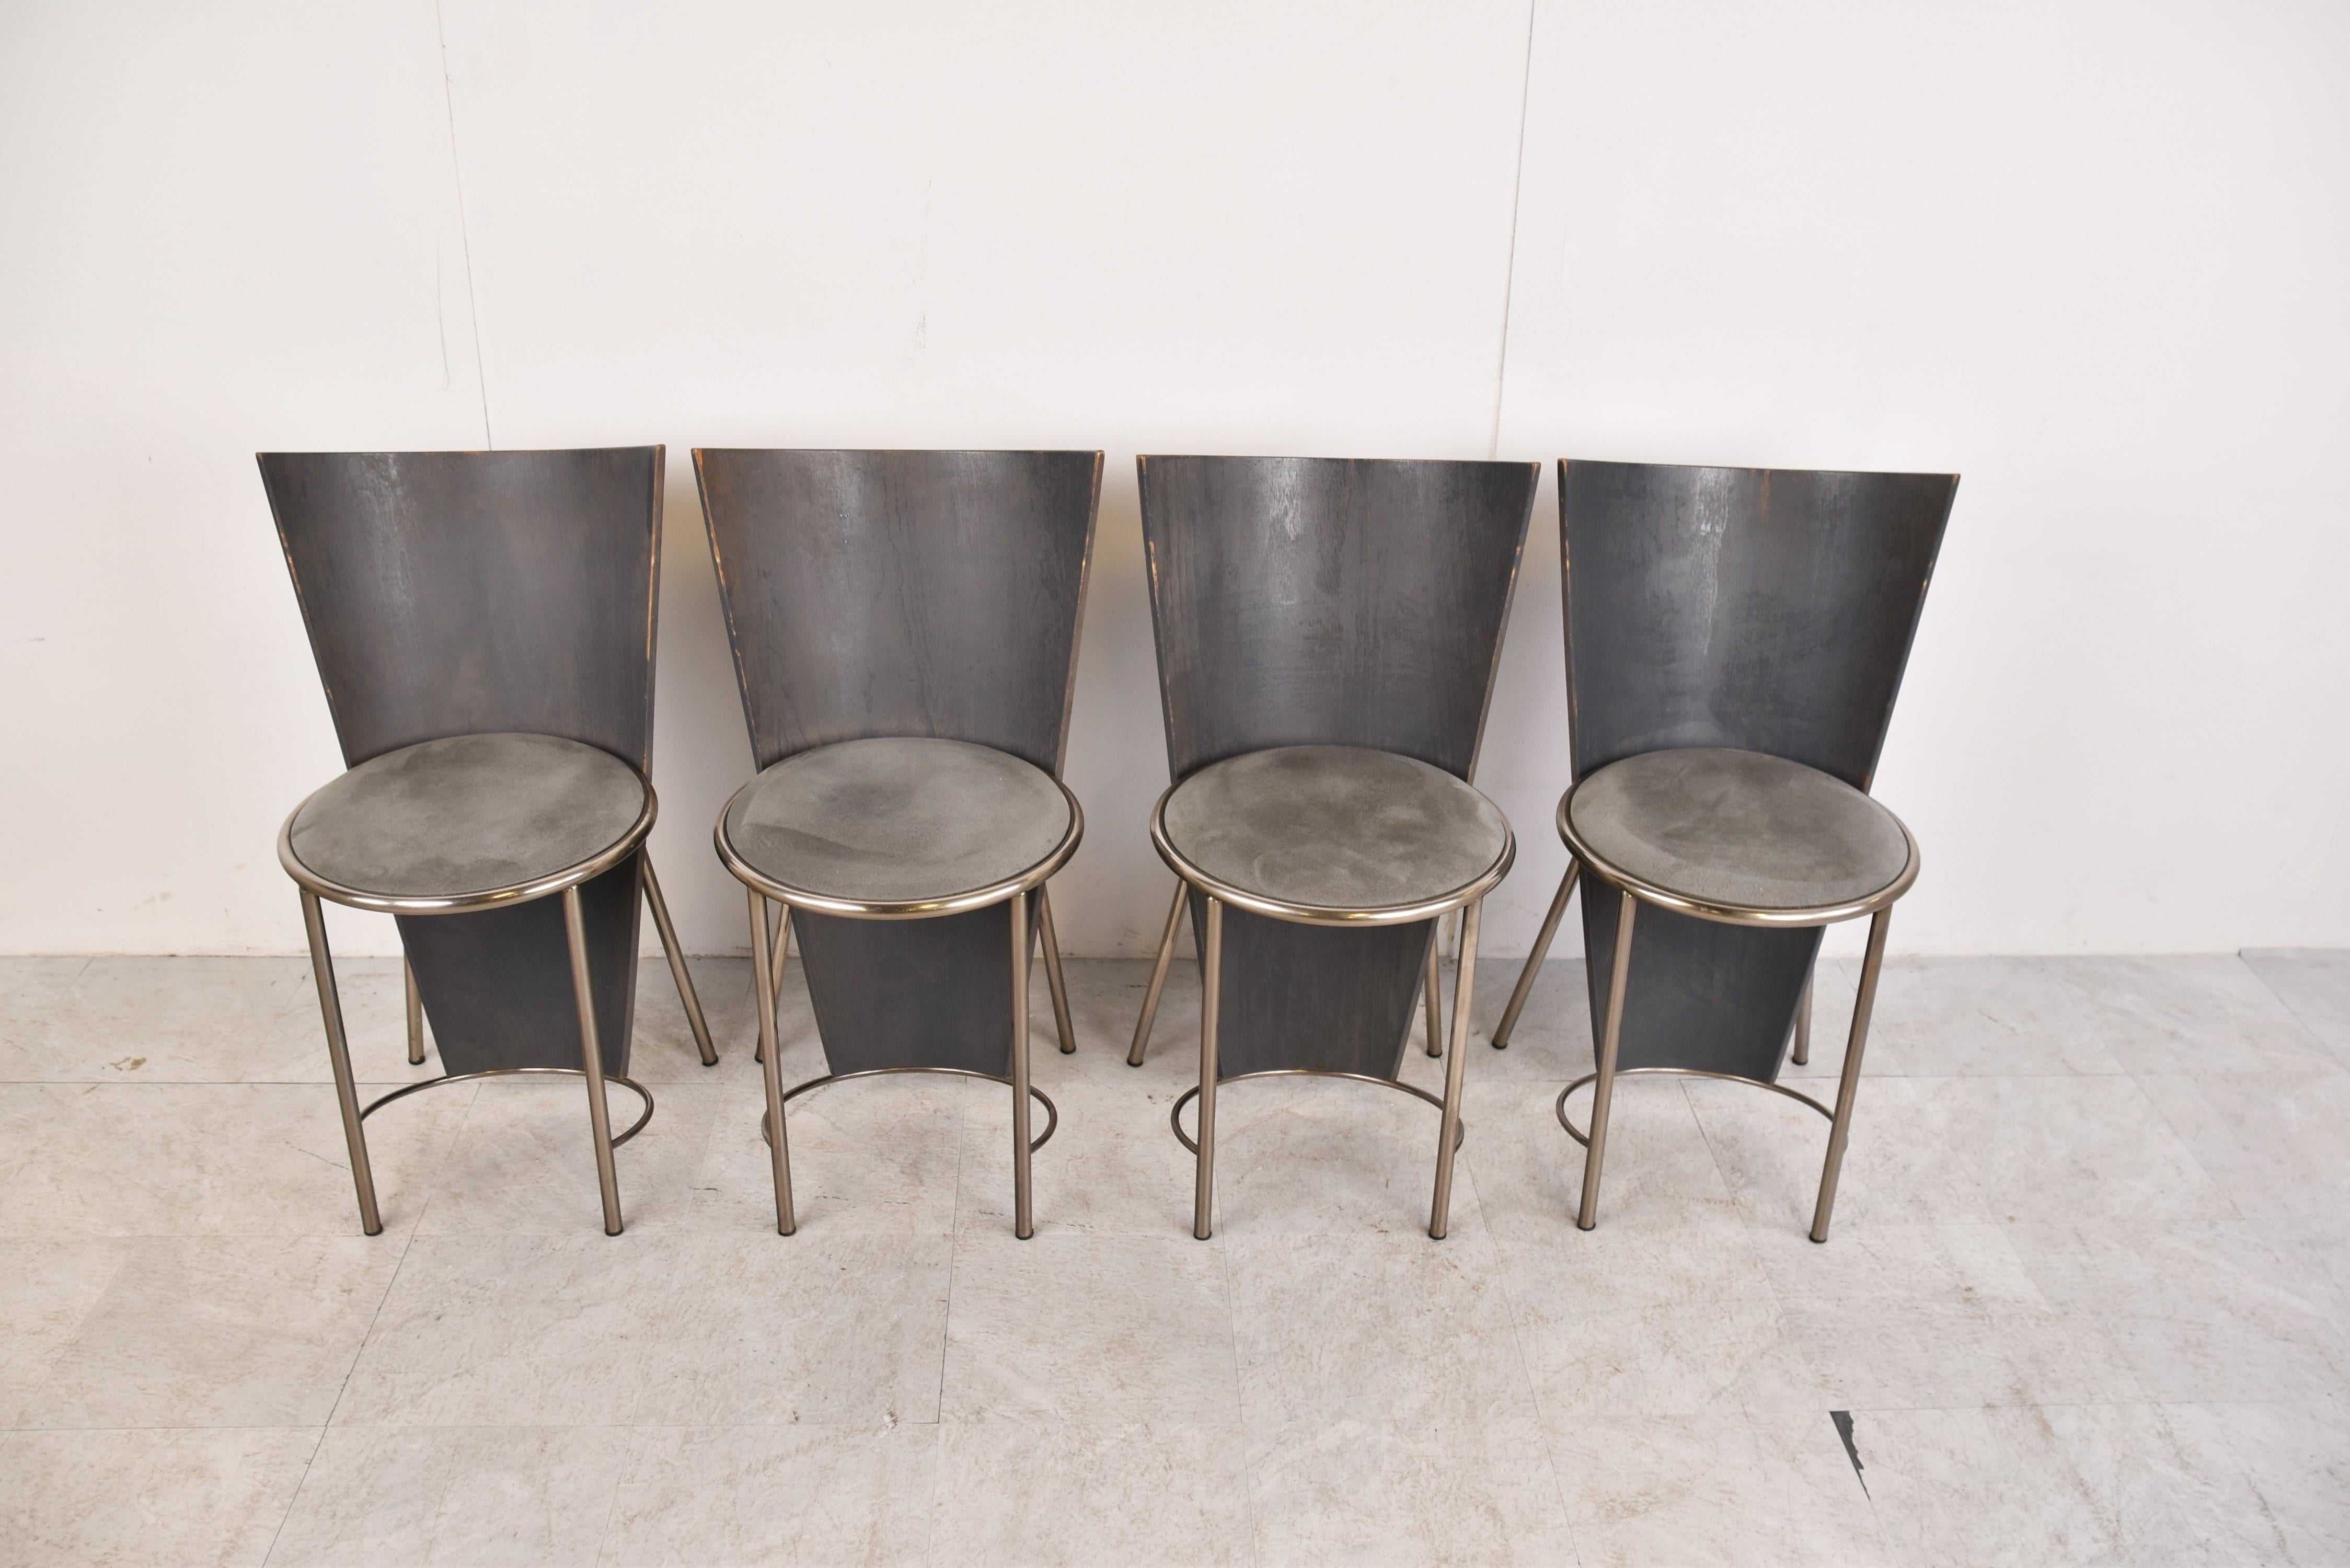 Set of four rare wooden version dining chairs designed by Frans Van Praet for belgochrom.

These chairs where designed for the world expo of 1992 in Sevilla.

The chairs have a beautiful geometric design and the seats have a grey suede